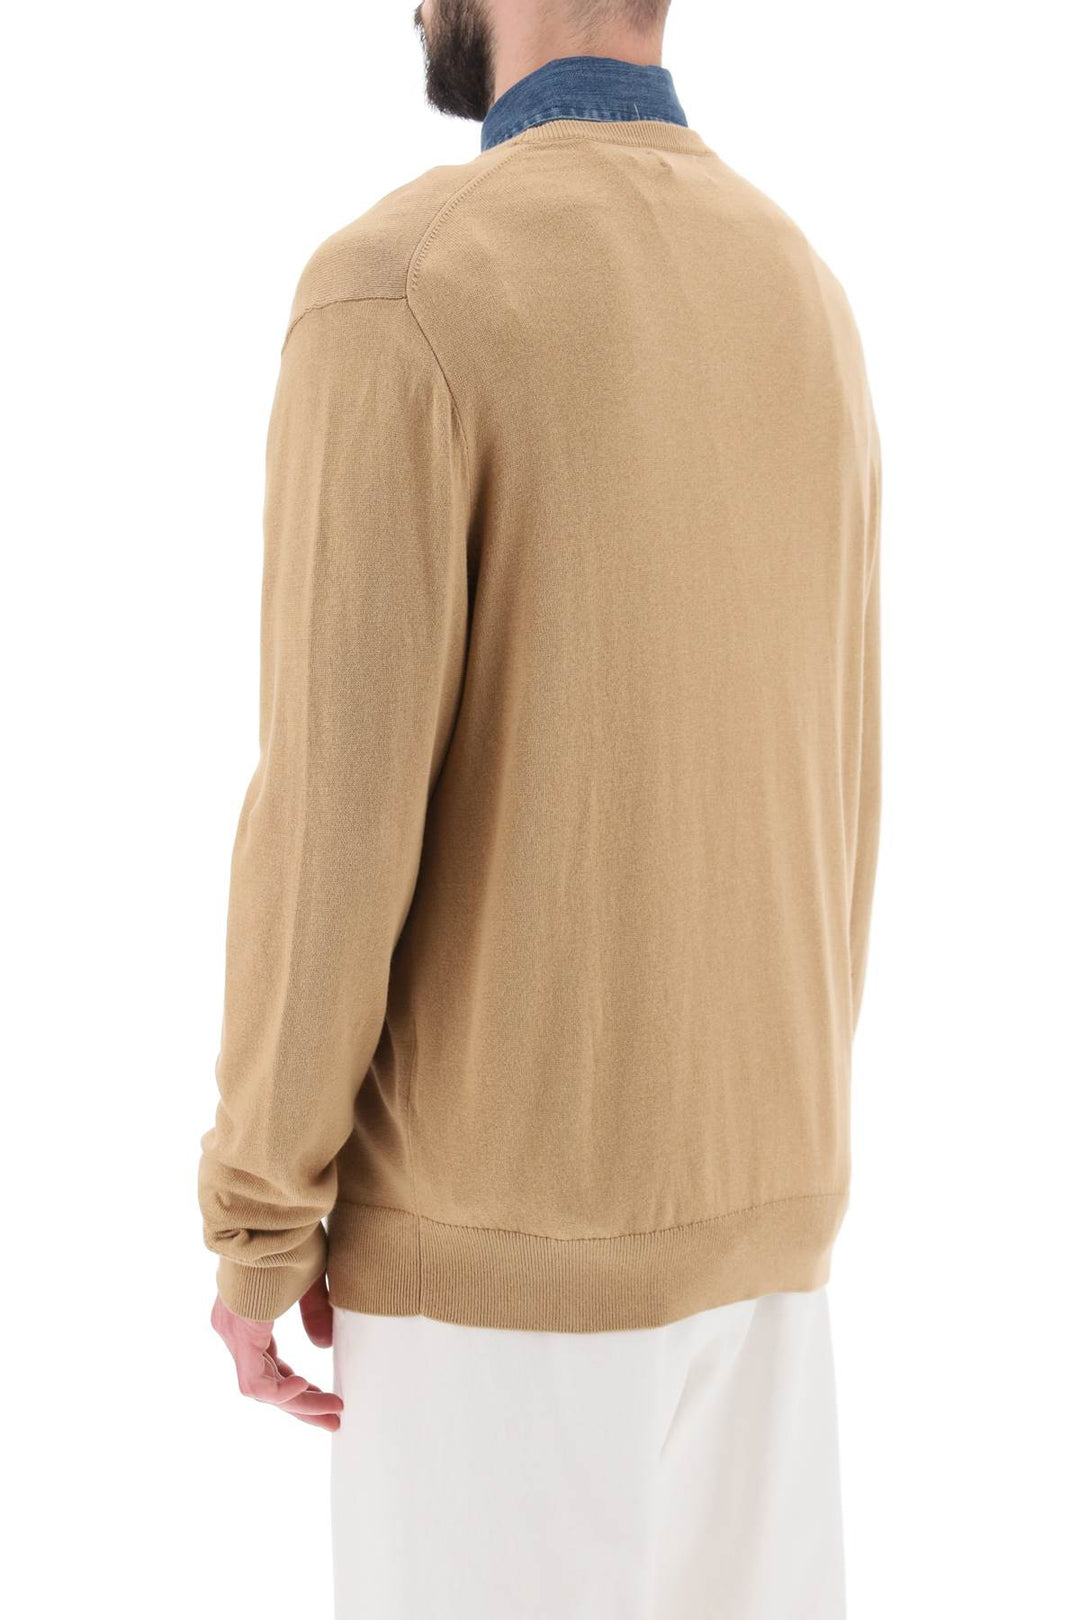 Polo Ralph Lauren Sweater In Cotton And Cashmere   Beige